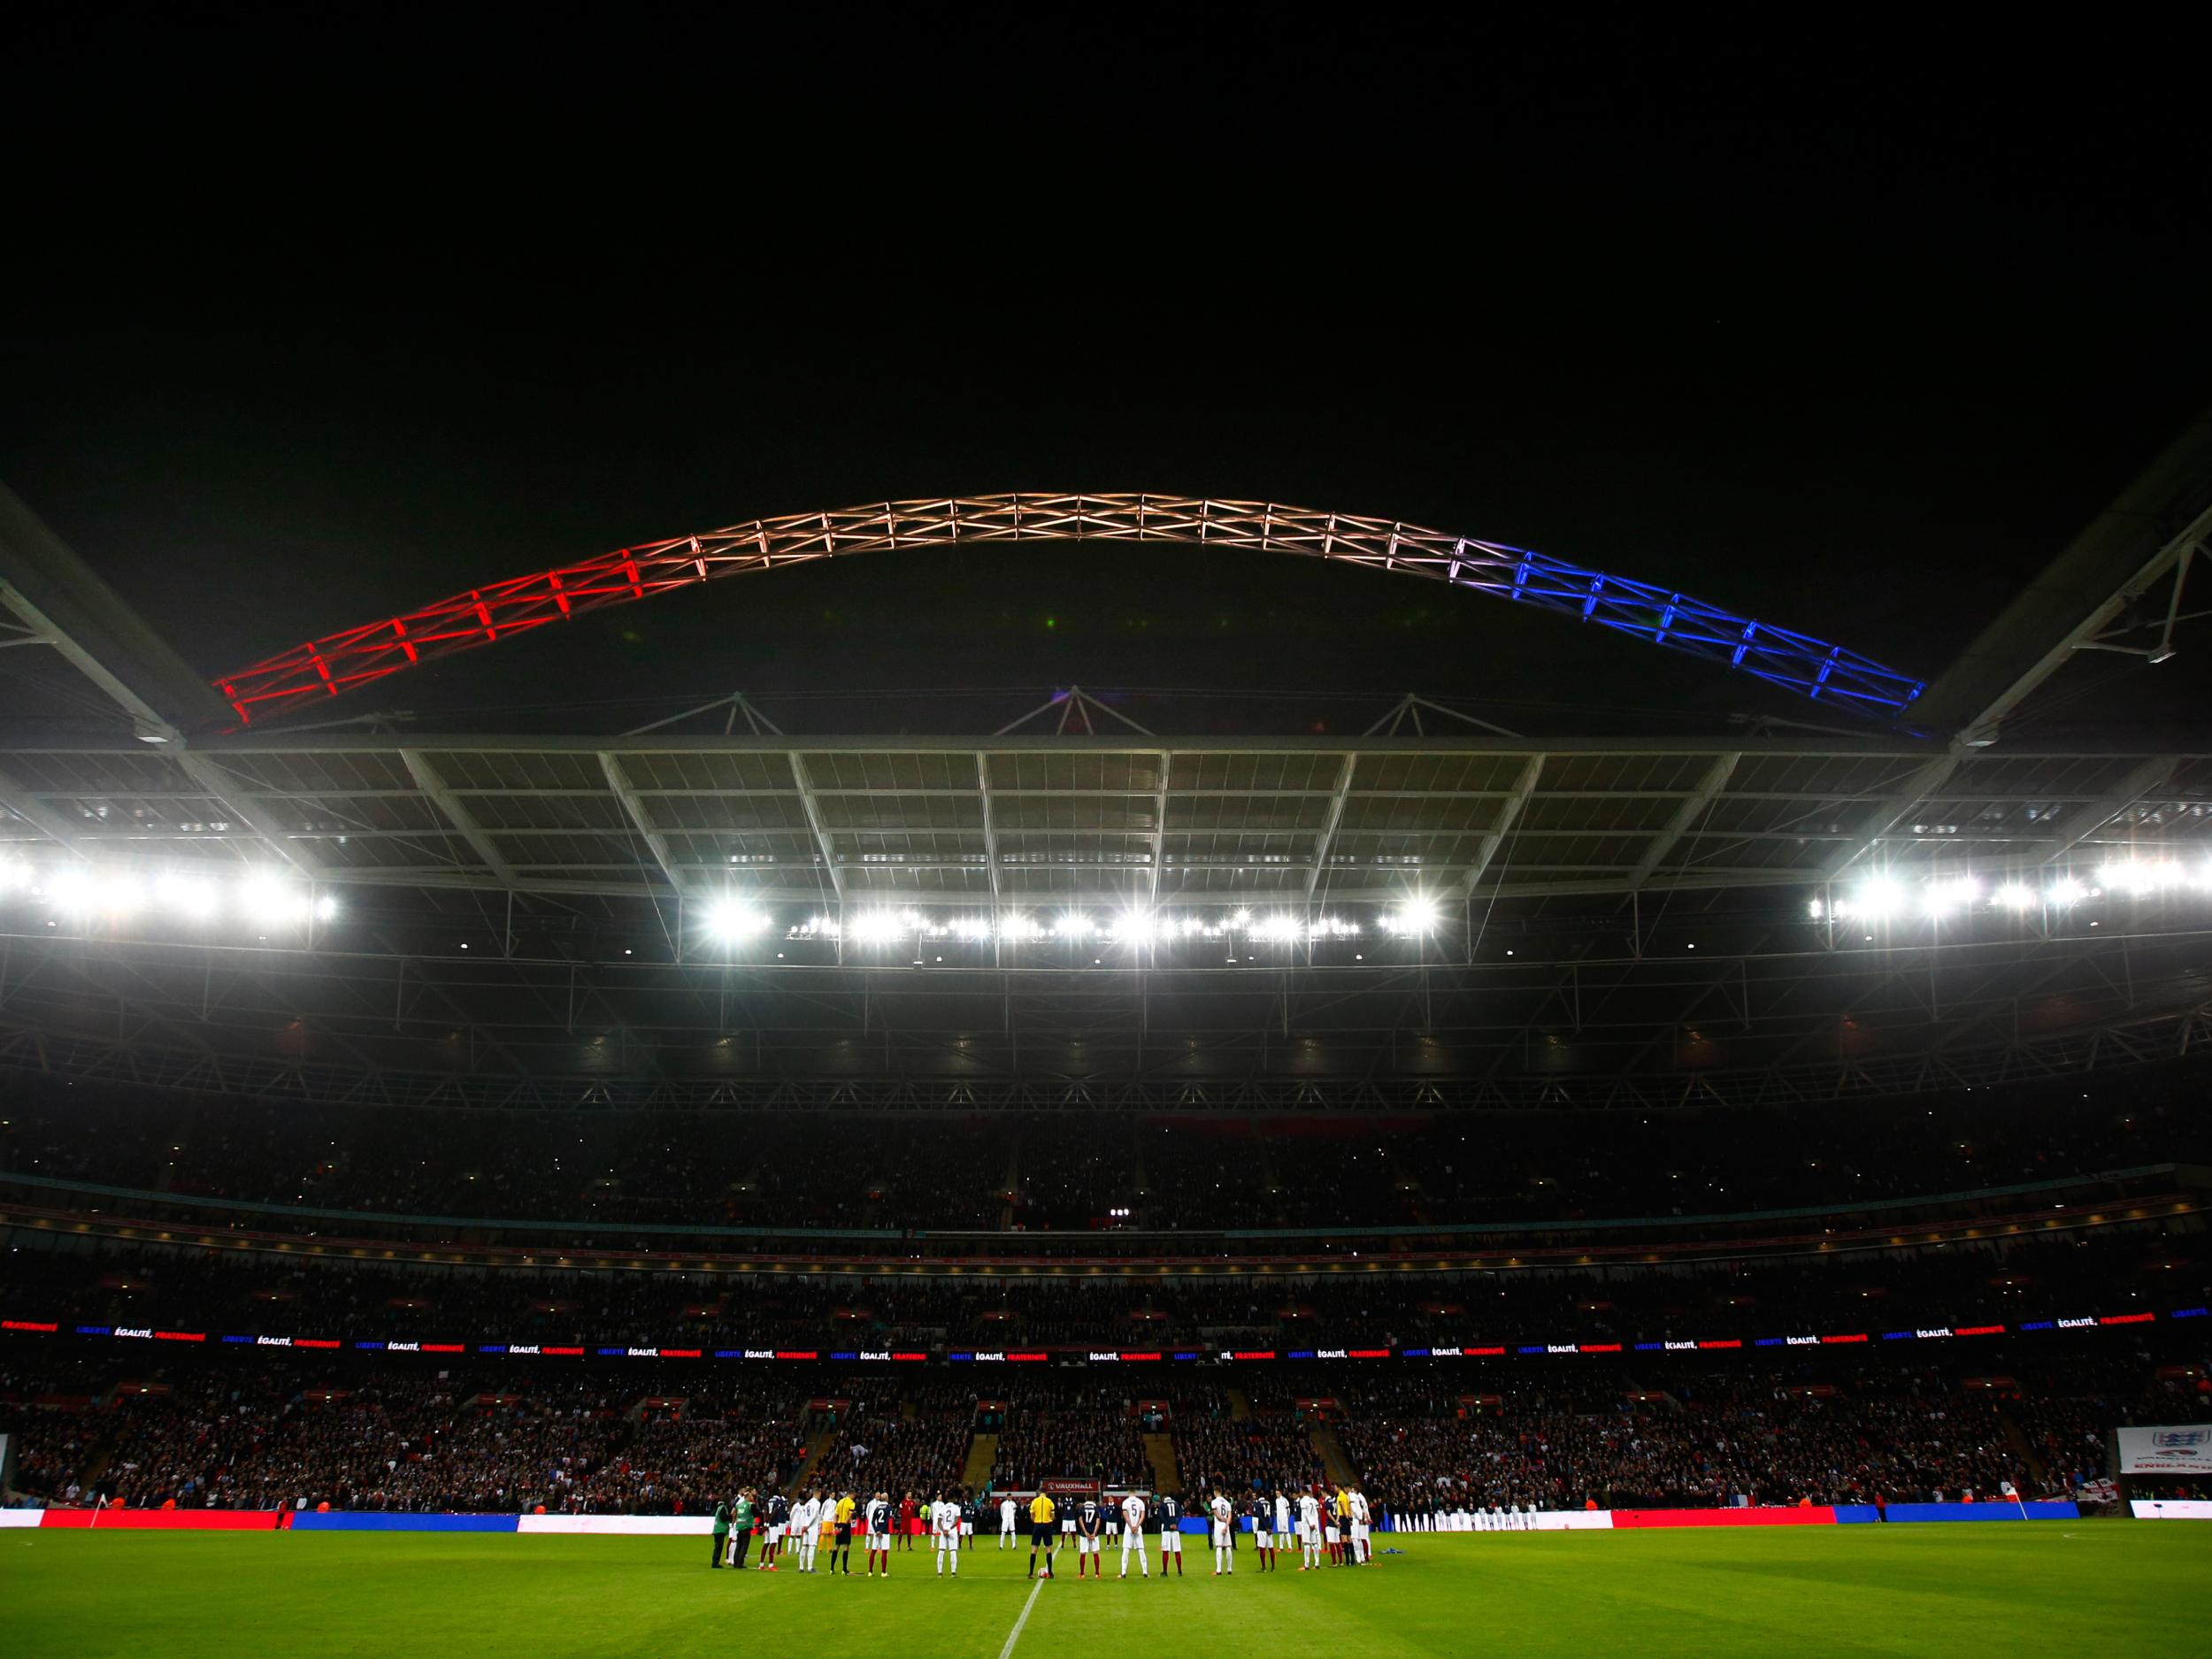 England fans paid their respects to French terror victims in November